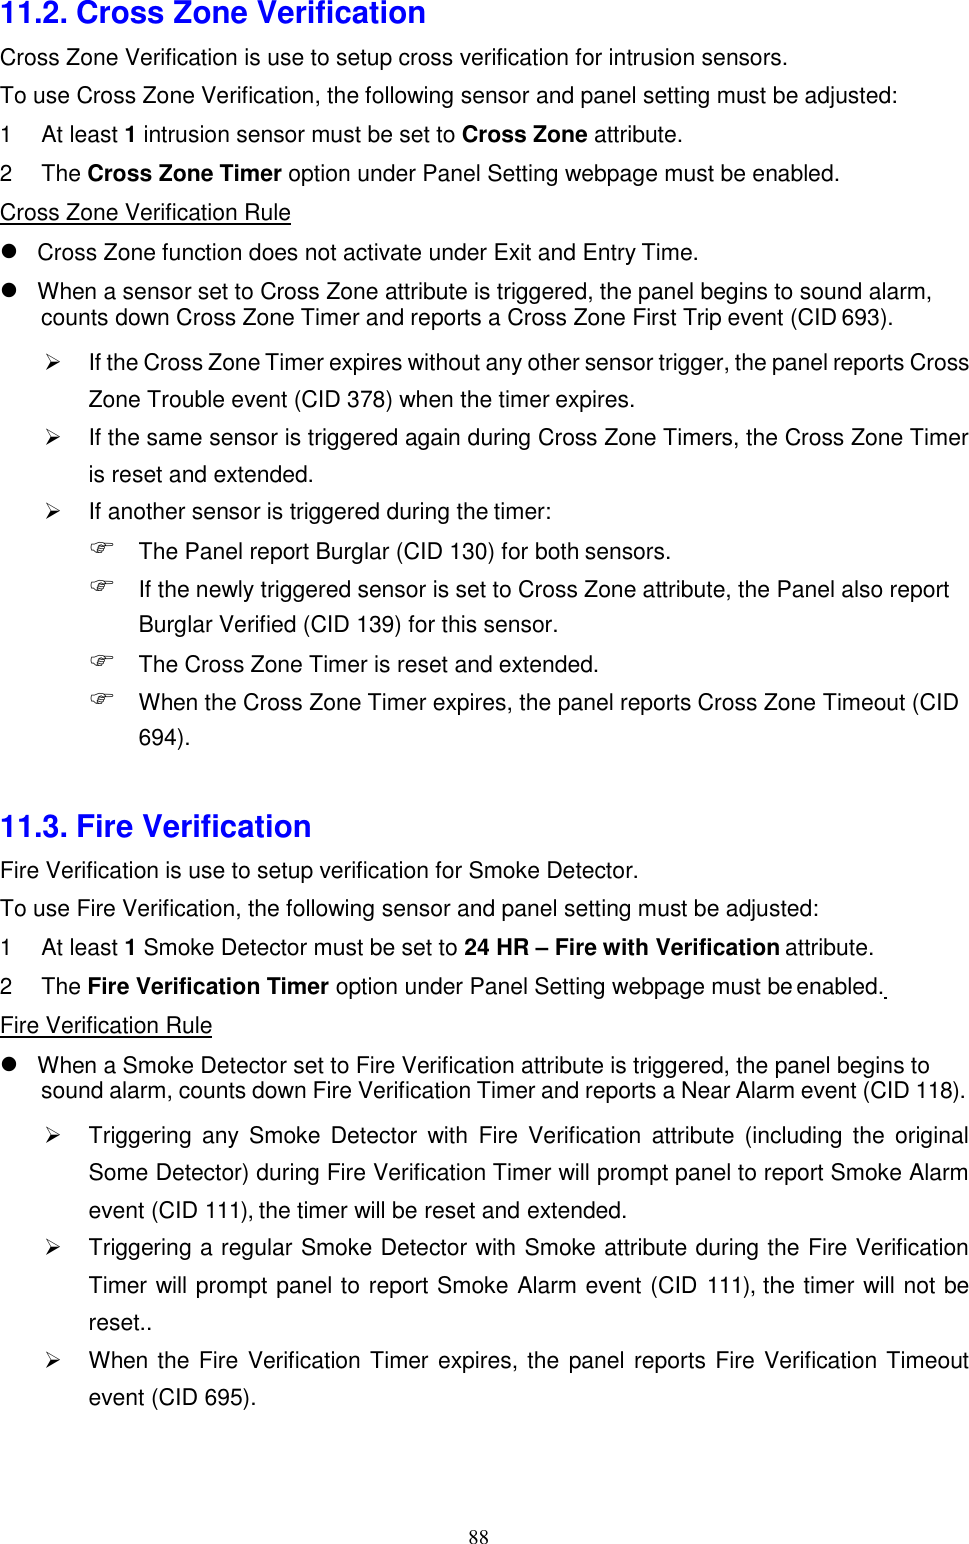 88  11.2. Cross Zone Verification Cross Zone Verification is use to setup cross verification for intrusion sensors. To use Cross Zone Verification, the following sensor and panel setting must be adjusted: 1 At least 1 intrusion sensor must be set to Cross Zone attribute. 2 The Cross Zone Timer option under Panel Setting webpage must be enabled. Cross Zone Verification Rule  Cross Zone function does not activate under Exit and Entry Time. When a sensor set to Cross Zone attribute is triggered, the panel begins to sound alarm, counts down Cross Zone Timer and reports a Cross Zone First Trip event (CID 693). If the Cross Zone Timer expires without any other sensor trigger, the panel reports Cross Zone Trouble event (CID 378) when the timer expires.  If the same sensor is triggered again during Cross Zone Timers, the Cross Zone Timer is reset and extended.  If another sensor is triggered during the timer:  The Panel report Burglar (CID 130) for both sensors.  If the newly triggered sensor is set to Cross Zone attribute, the Panel also report Burglar Verified (CID 139) for this sensor.  The Cross Zone Timer is reset and extended.  When the Cross Zone Timer expires, the panel reports Cross Zone Timeout (CID 694).   11.3. Fire Verification Fire Verification is use to setup verification for Smoke Detector. To use Fire Verification, the following sensor and panel setting must be adjusted: 1 At least 1 Smoke Detector must be set to 24 HR – Fire with Verification attribute. 2 The Fire Verification Timer option under Panel Setting webpage must be enabled. Fire Verification Rule  When a Smoke Detector set to Fire Verification attribute is triggered, the panel begins to sound alarm, counts down Fire Verification Timer and reports a Near Alarm event (CID 118). Triggering  any  Smoke  Detector  with  Fire  Verification attribute  (including the  original Some Detector) during Fire Verification Timer will prompt panel to report Smoke Alarm event (CID 111), the timer will be reset and extended.  Triggering a regular Smoke Detector with Smoke attribute during the Fire Verification Timer will prompt panel to report Smoke Alarm event (CID 111), the timer will not be reset..  When the Fire Verification Timer expires, the panel reports Fire Verification Timeout event (CID 695). 